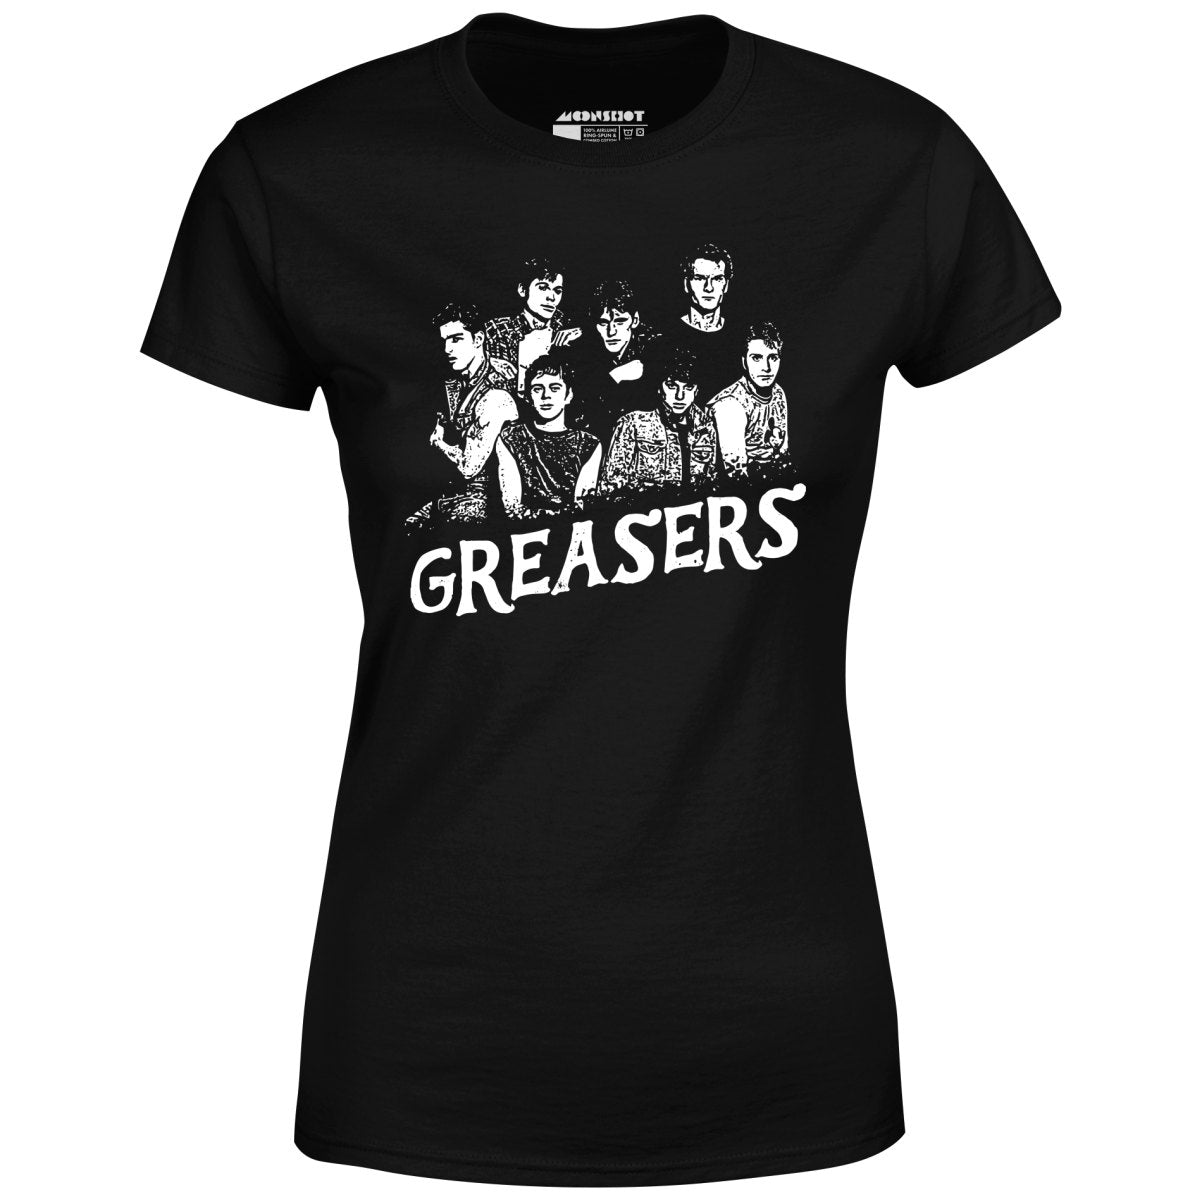 Greasers - Women's T-Shirt